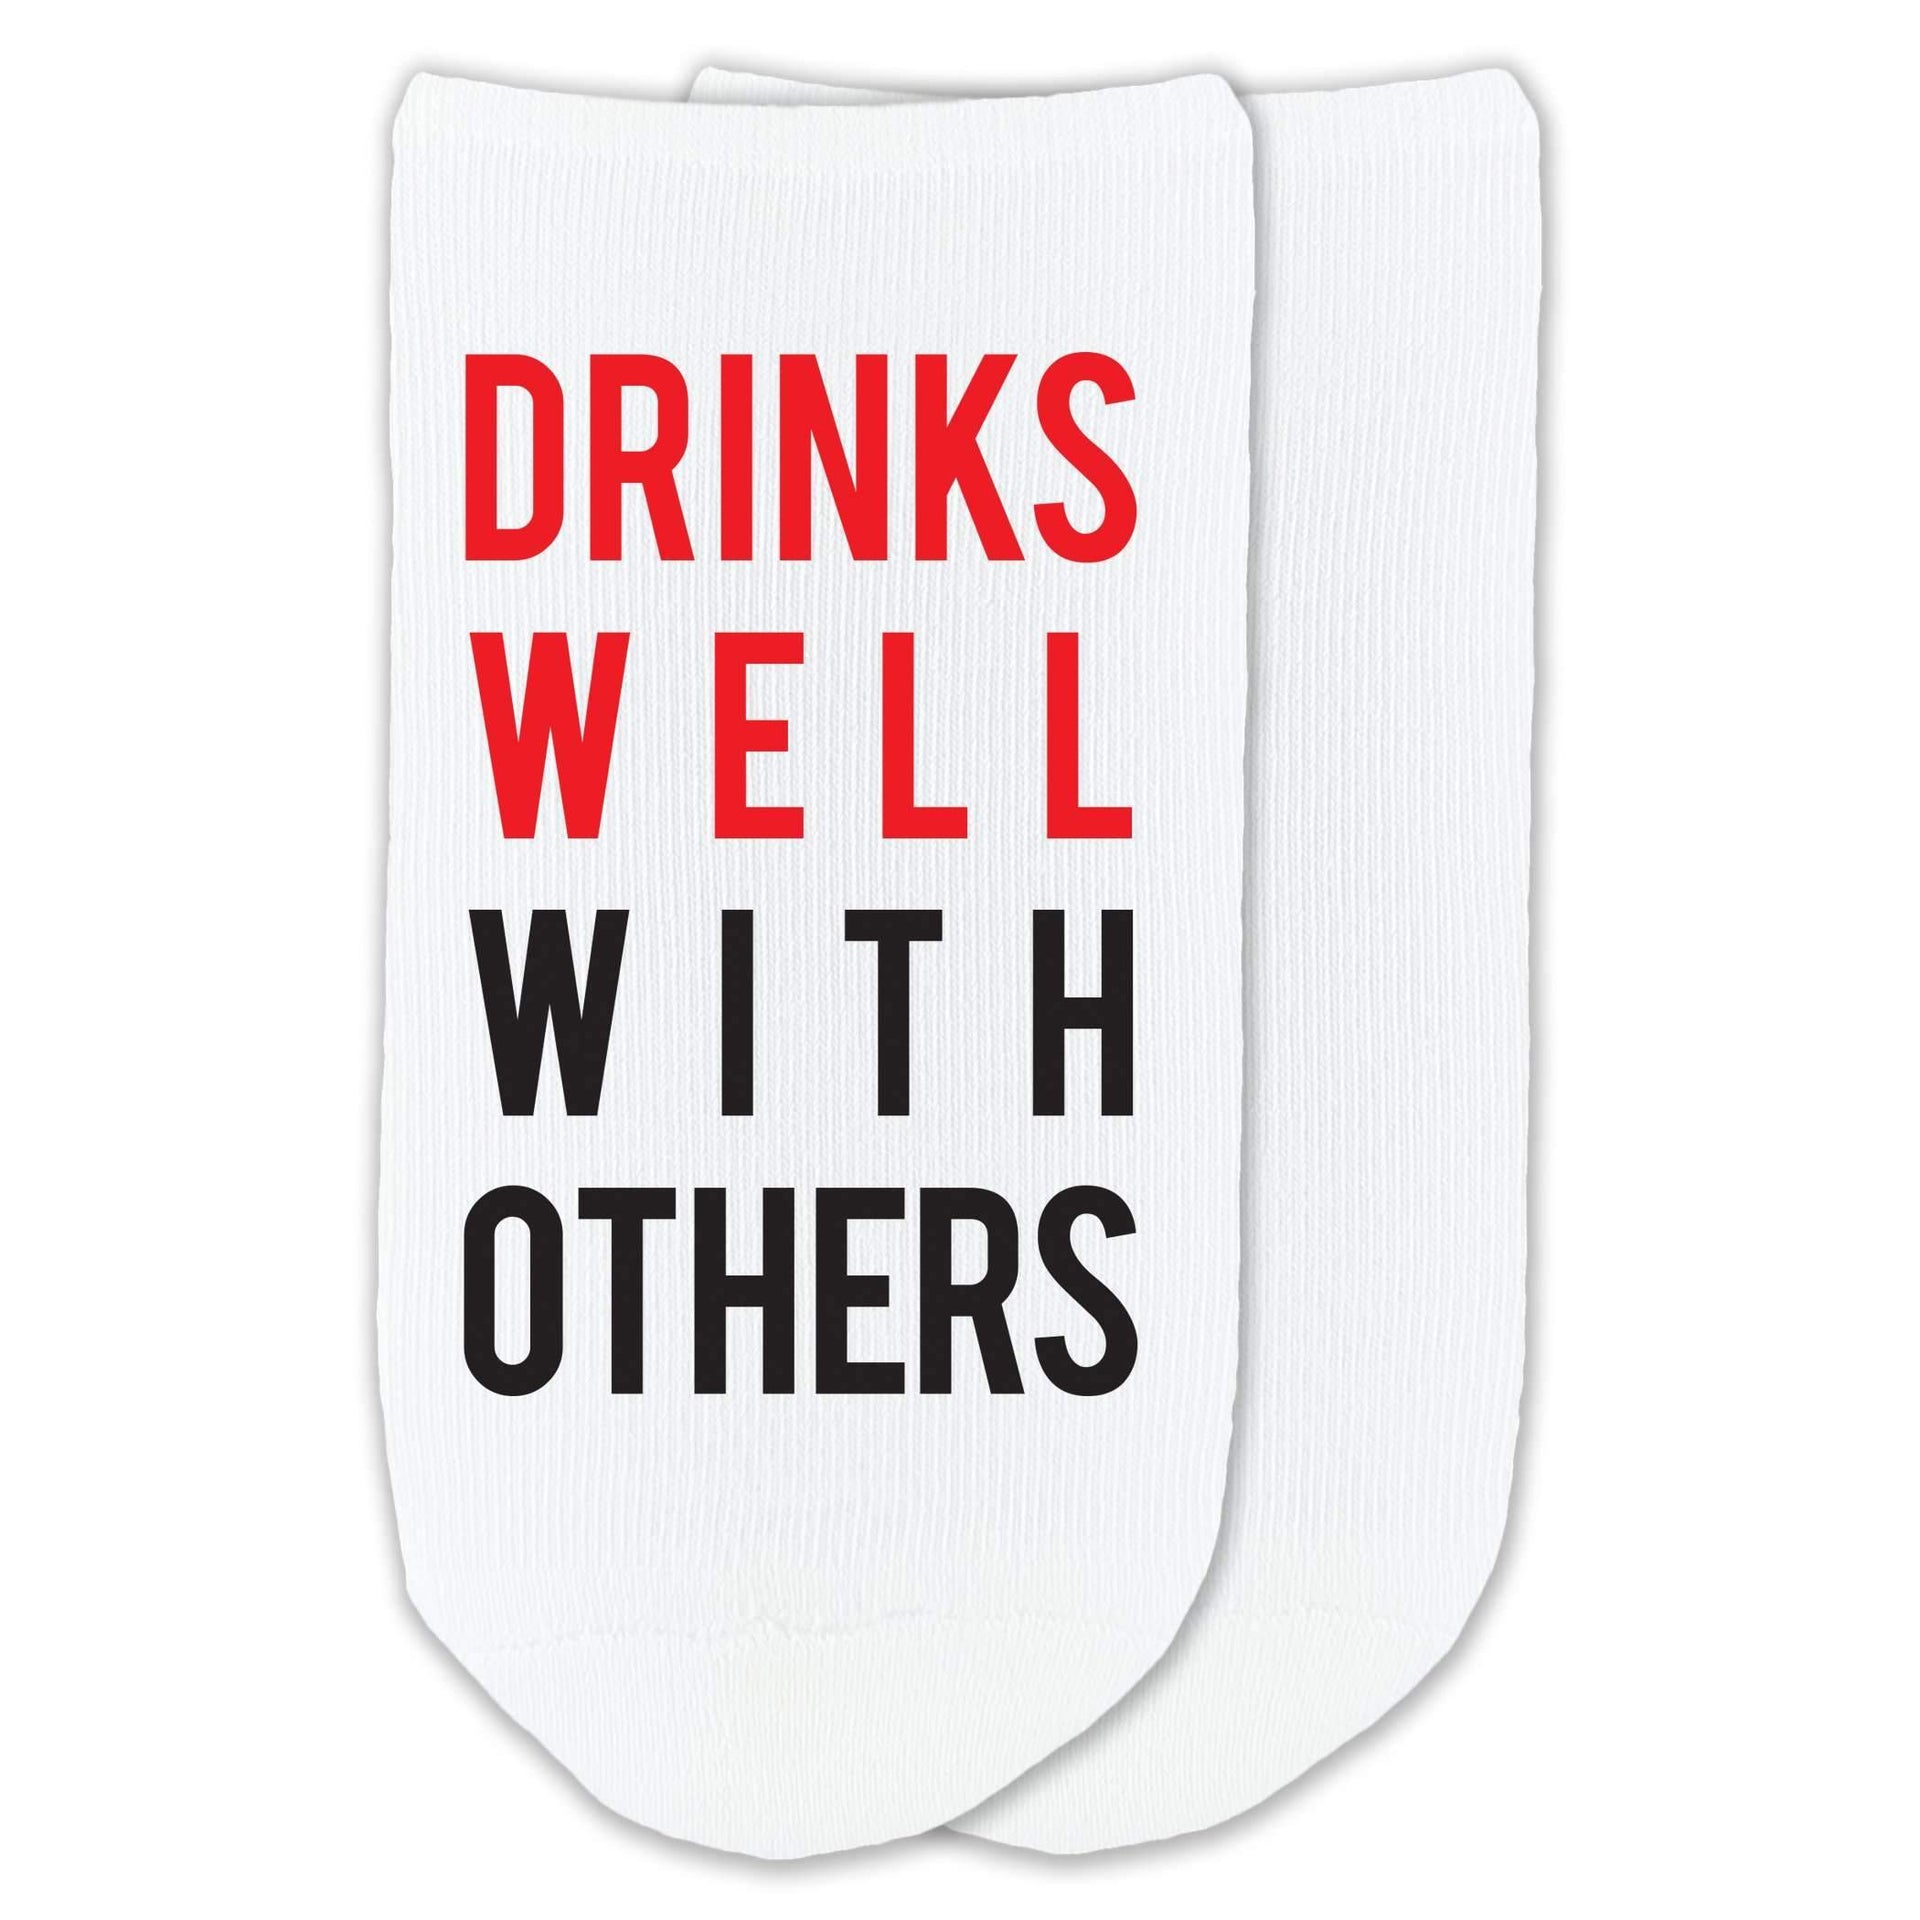 Drinks well with others custom printed on no show socks.